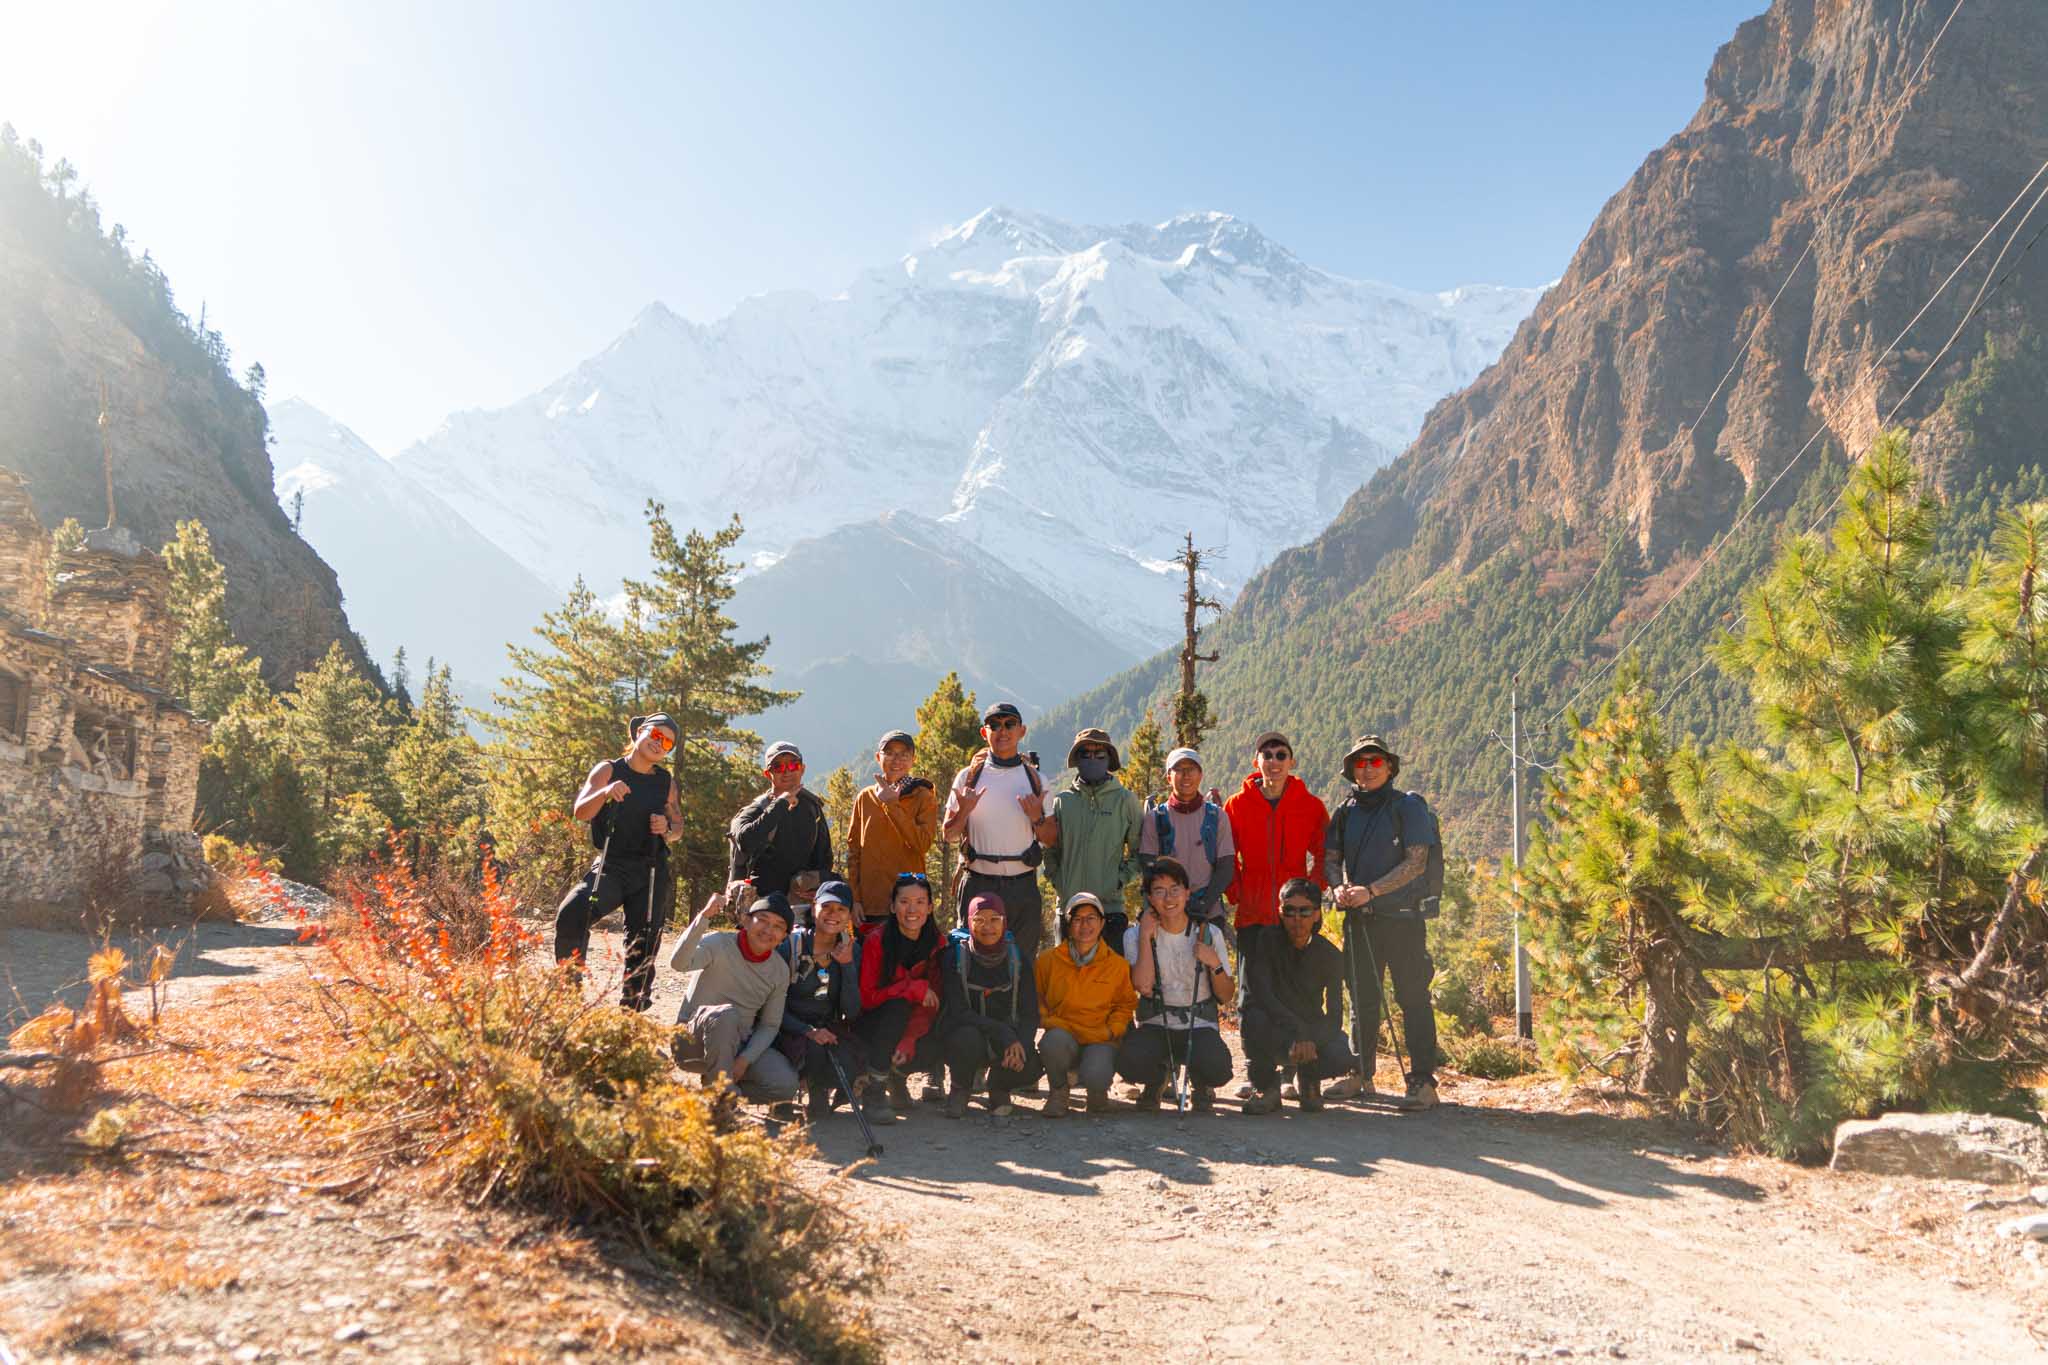 Nepal - Annapurna - Group of friends in mountain community trip